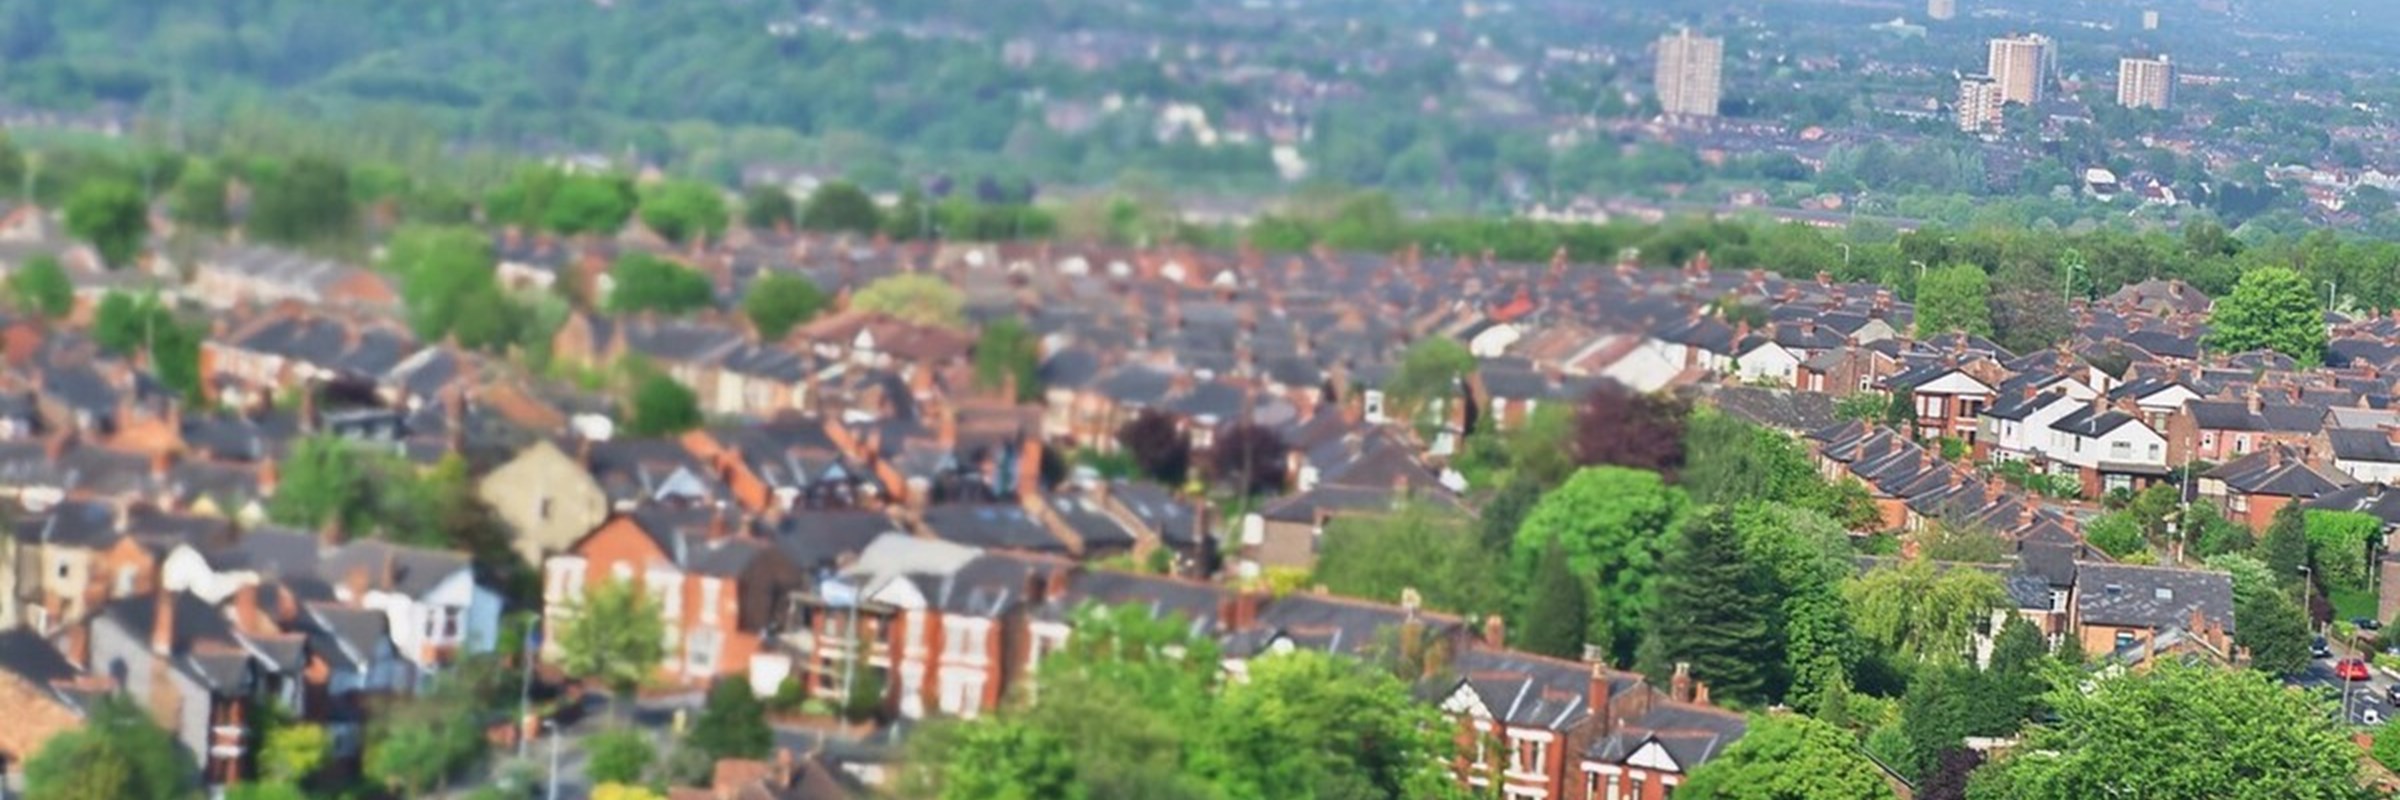 A picture of houses in Greater Manchester